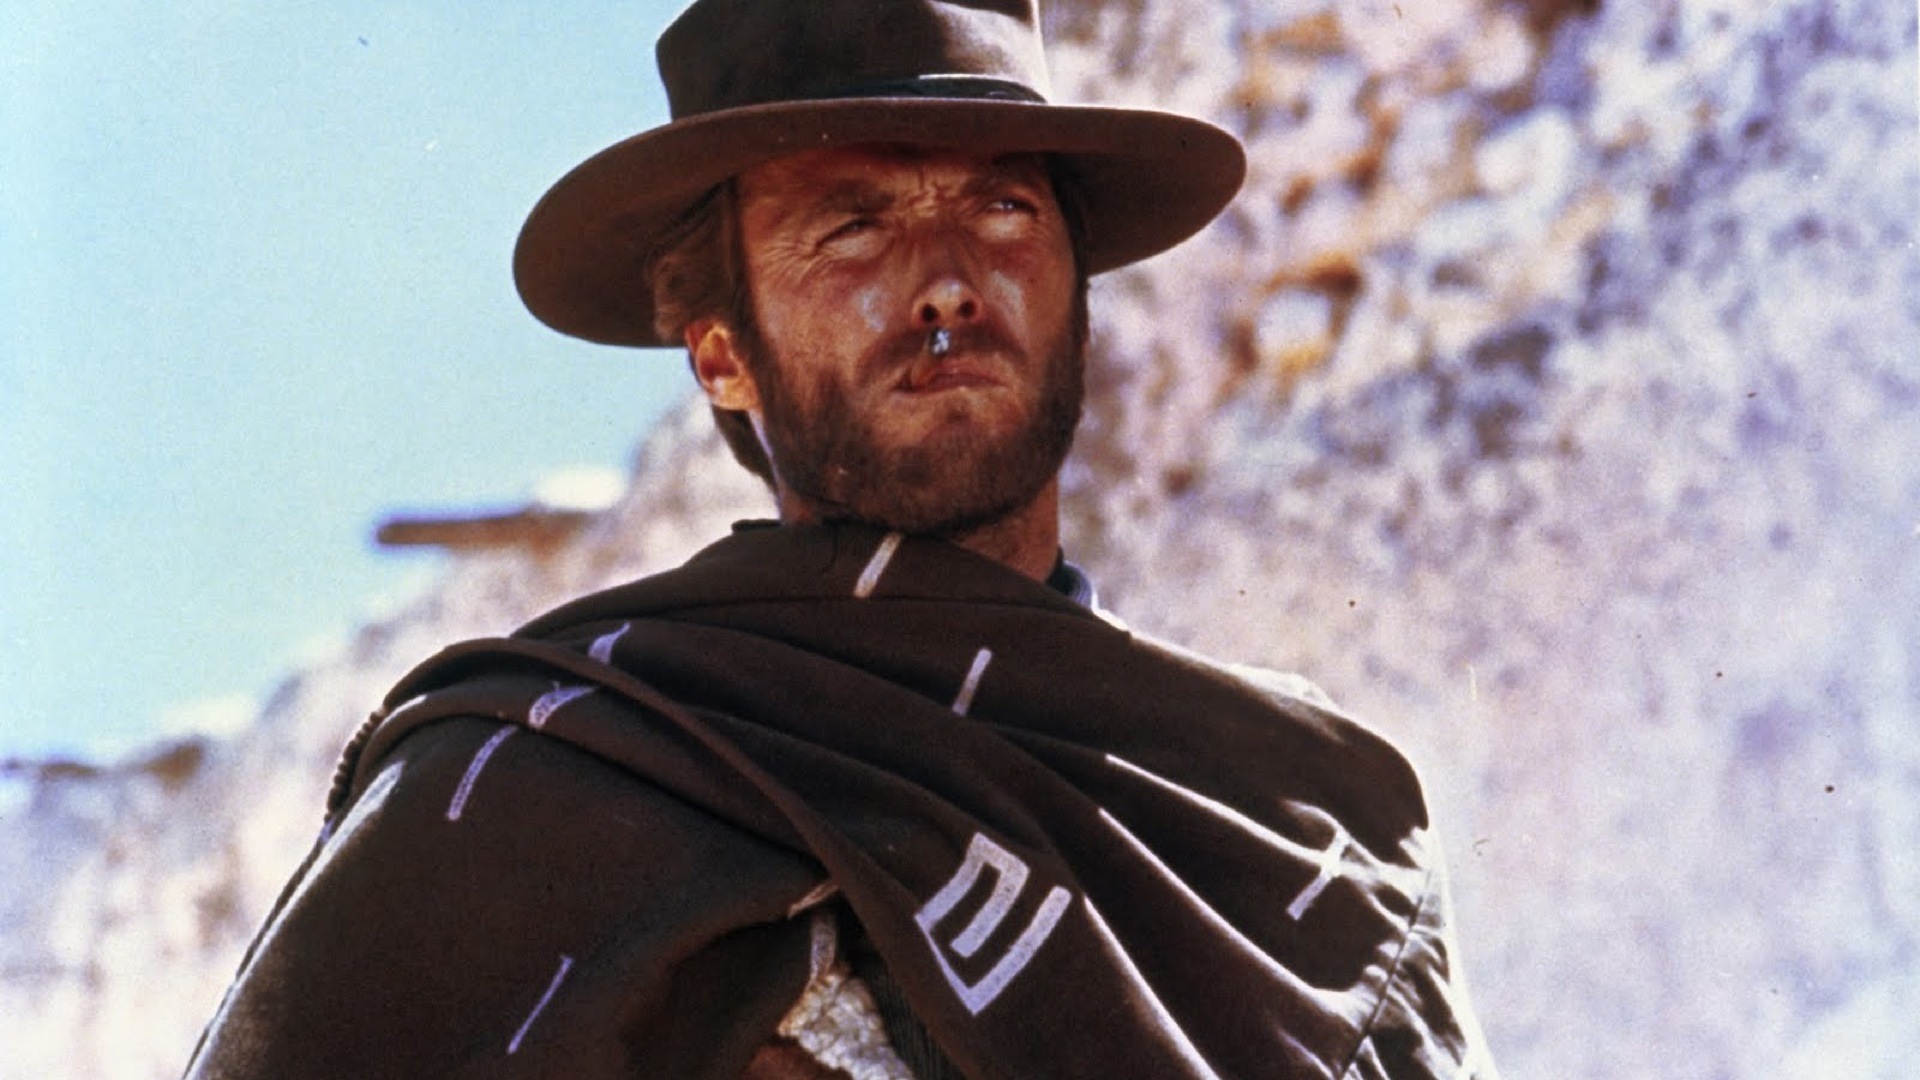 Movie A Fistful Of Dollars 1920x1080